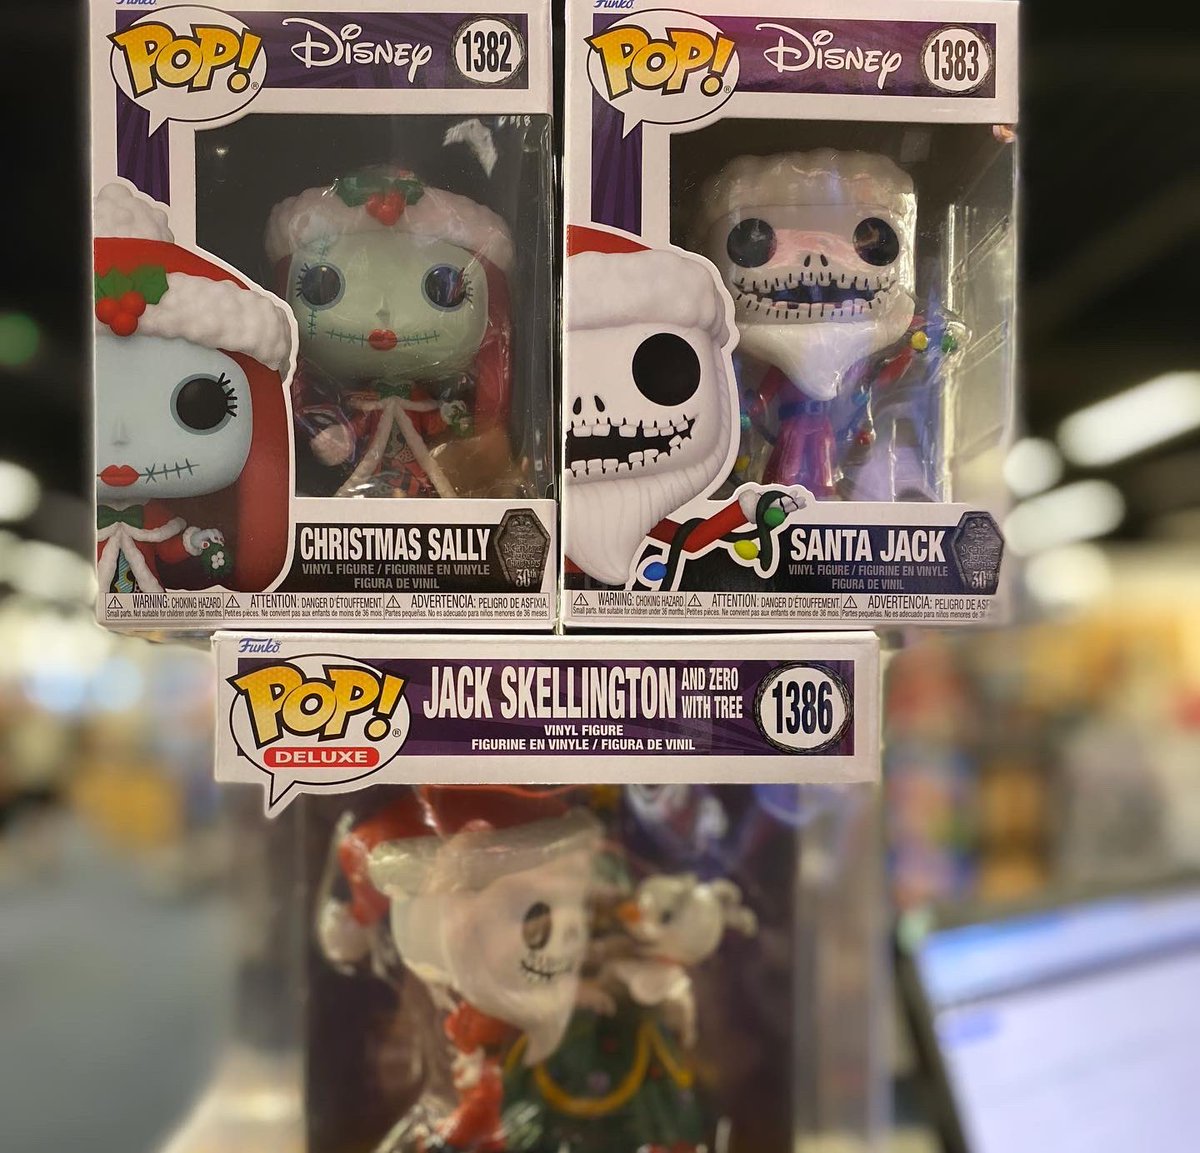 Tons of new Funko pops have arrived in store! From One Piece to The Nightmare Before Christmas, there’s something for everyone!#funko #funkopop #popvinyl #hmv #hmvcrawley